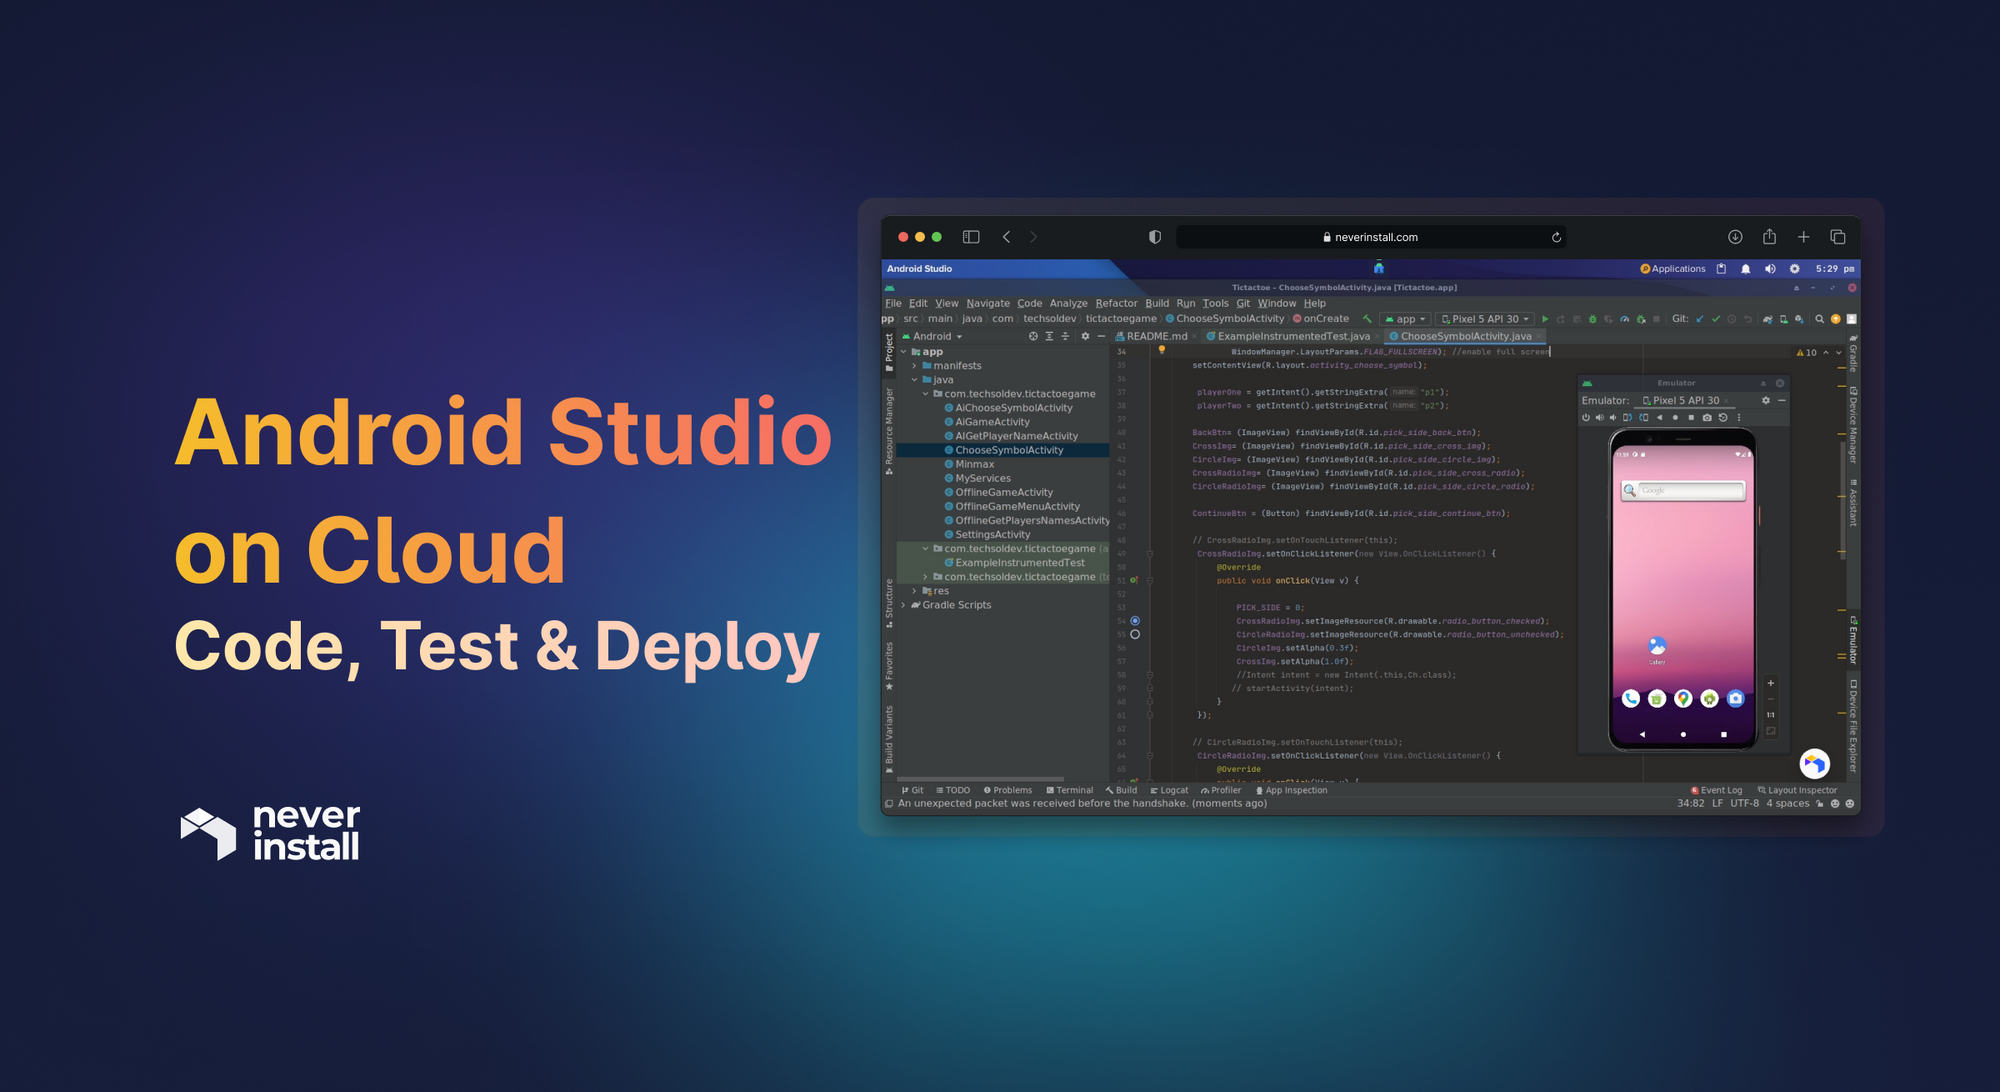 Android Studio on Cloud: Code, Test & Deploy